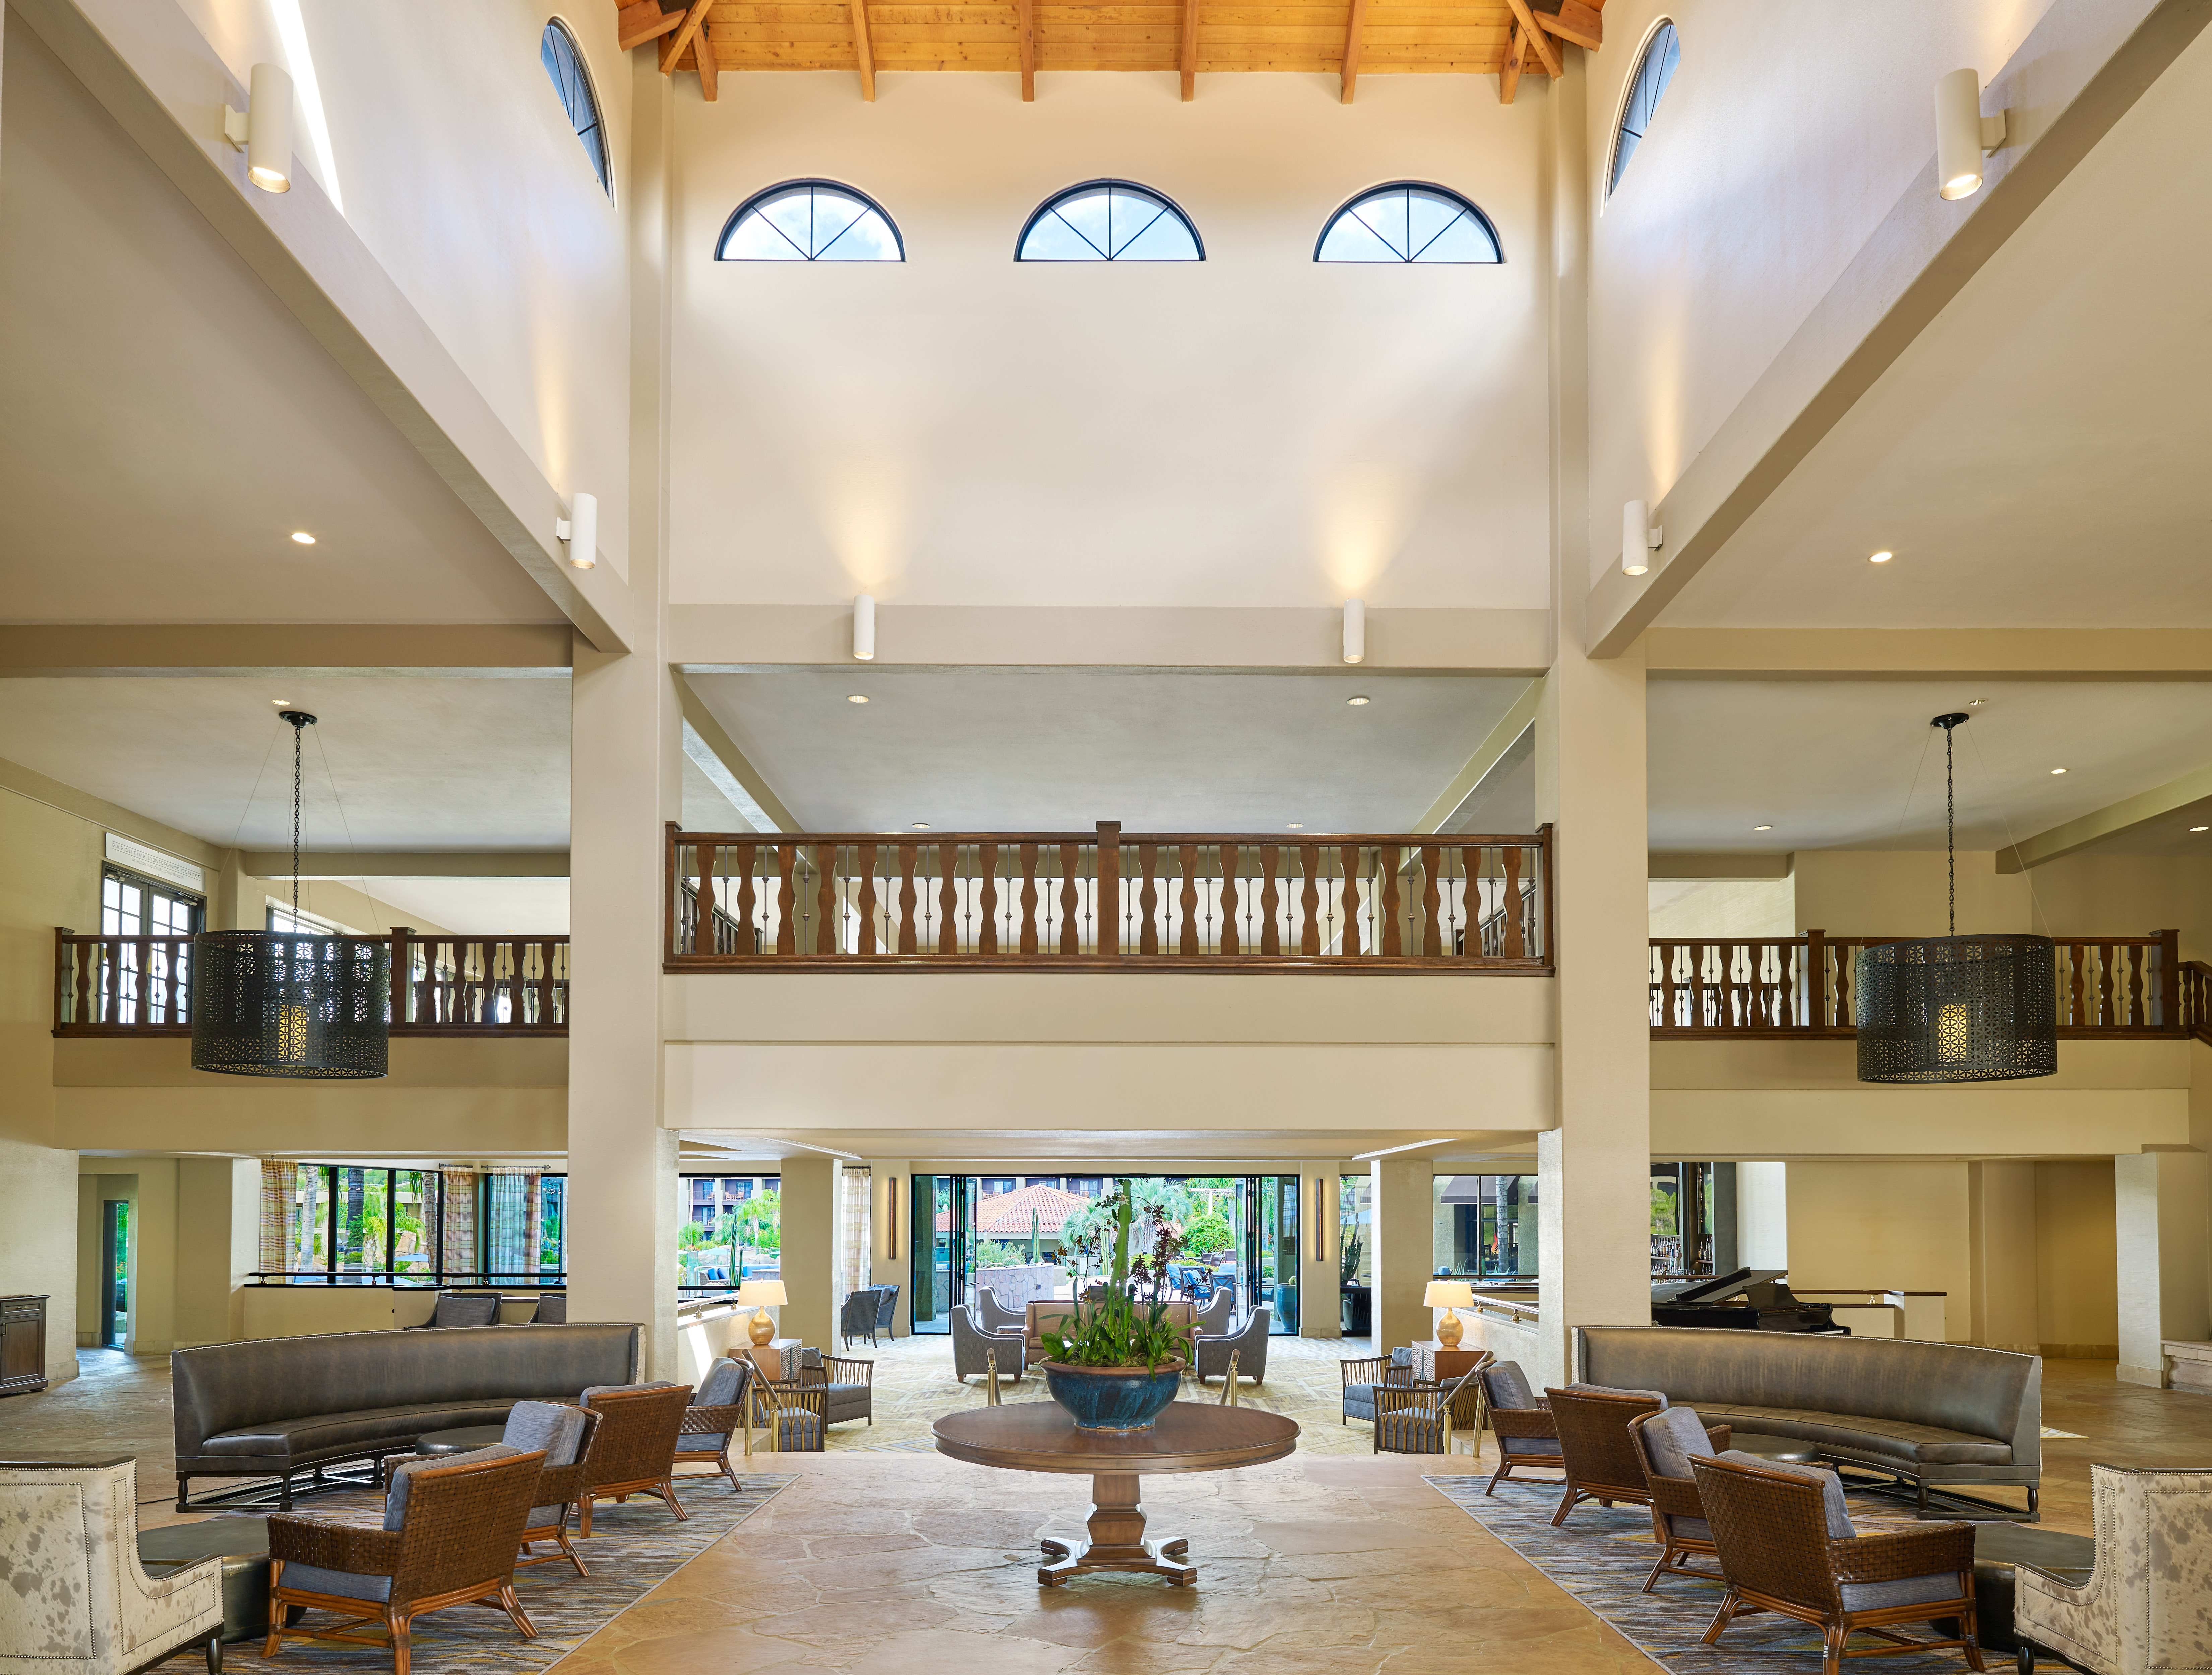 Grand View of Lobby Seating Area with Large Round Table in the Center Surrounded by Sofas and Chairs and Views of Upstairs and Outside